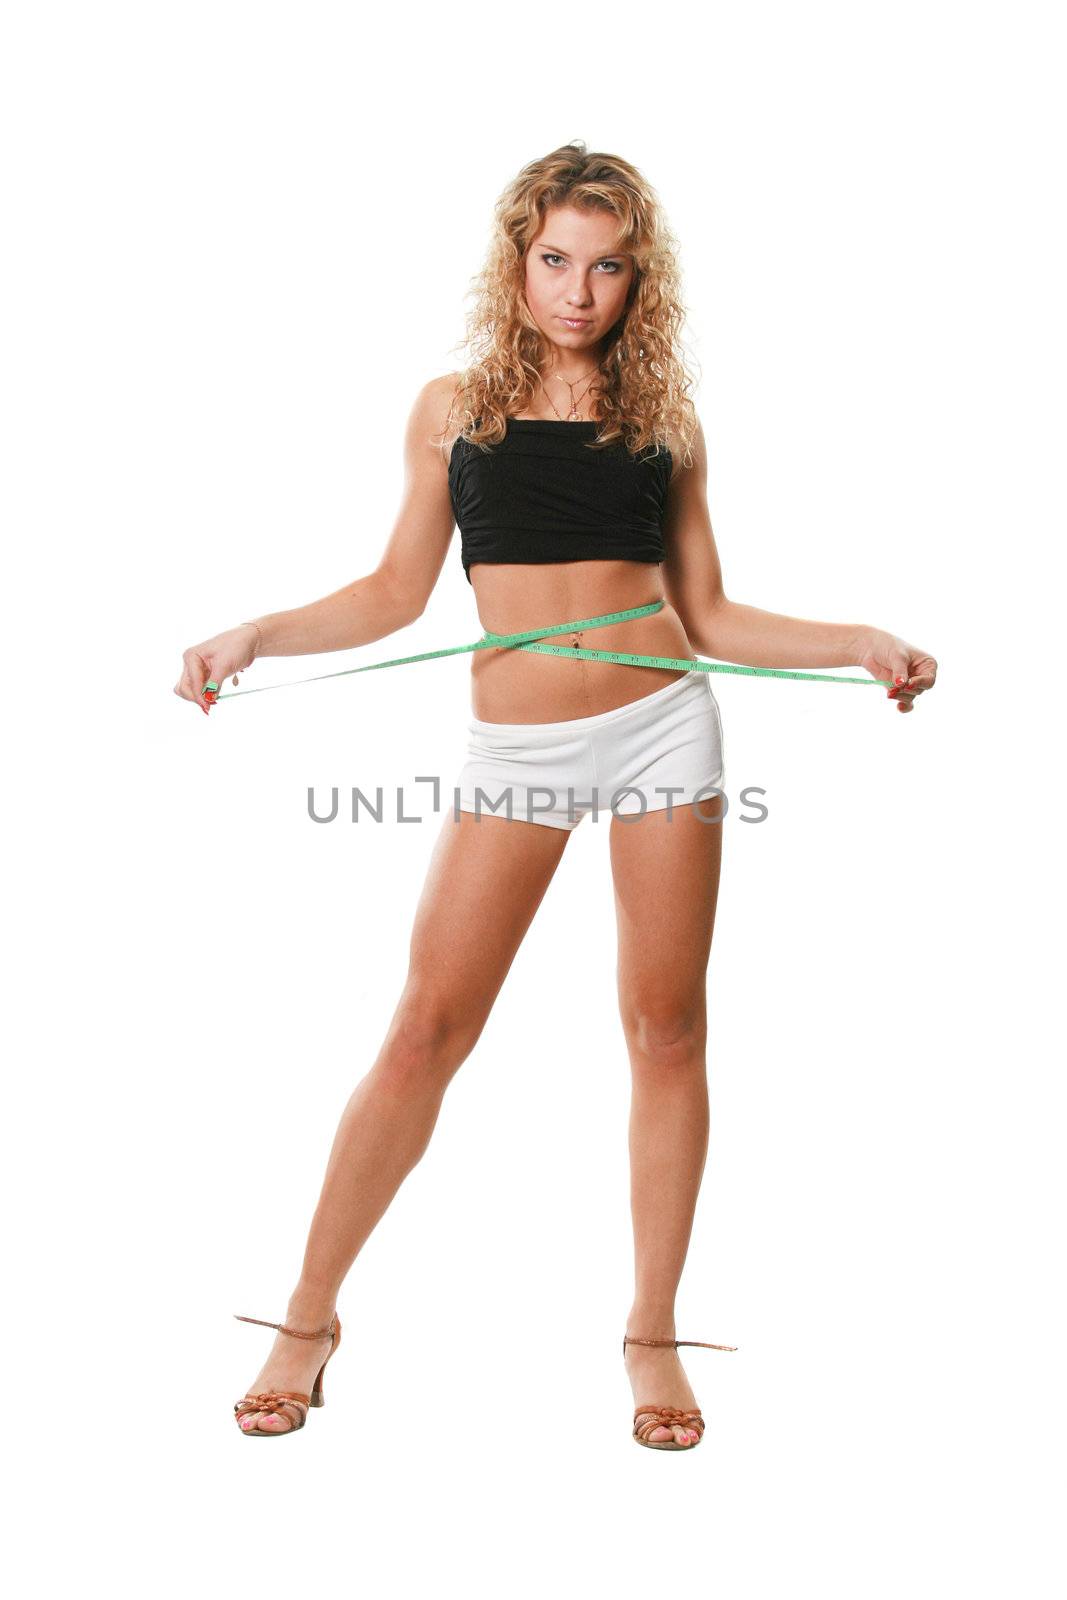 The sports attractive woman measures a waist